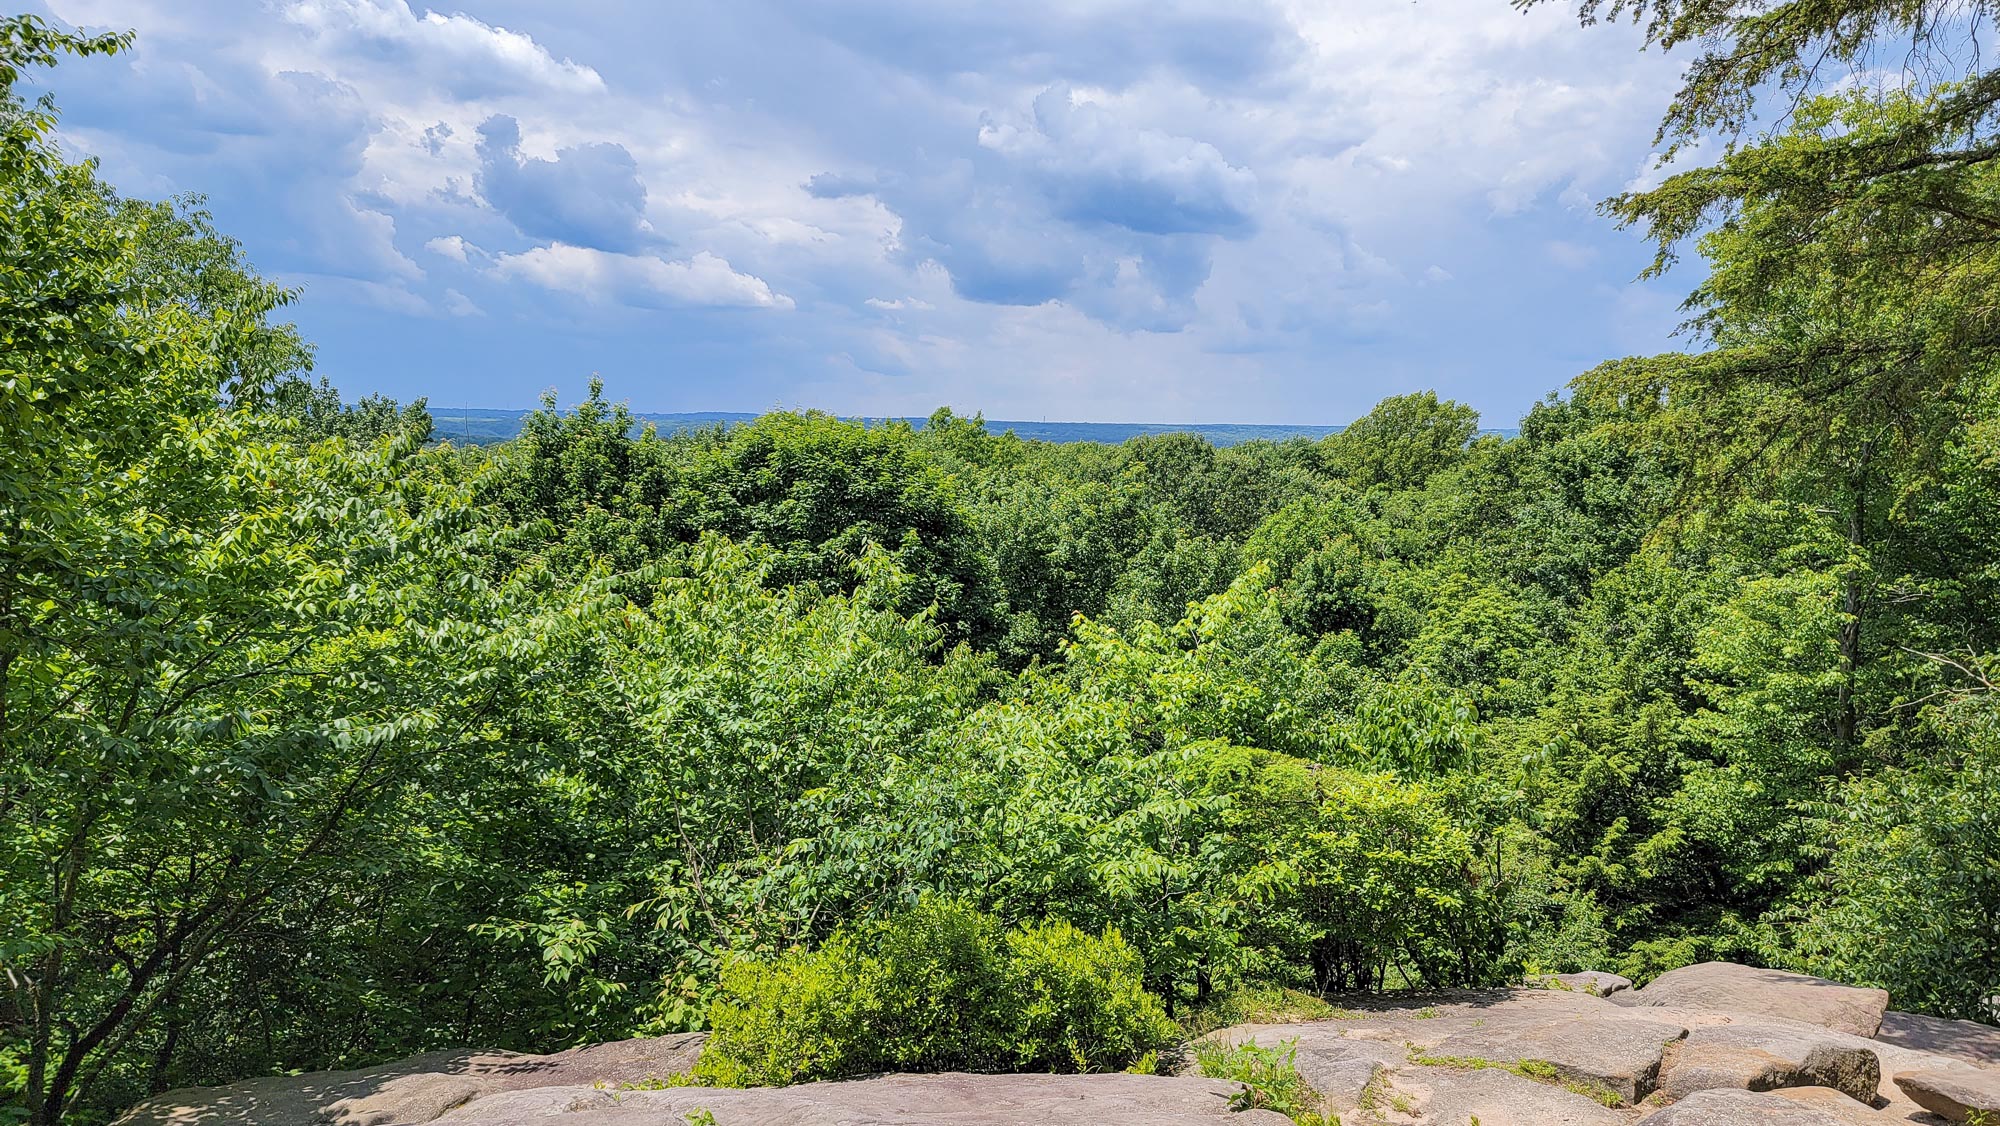 The Ledges Overlook